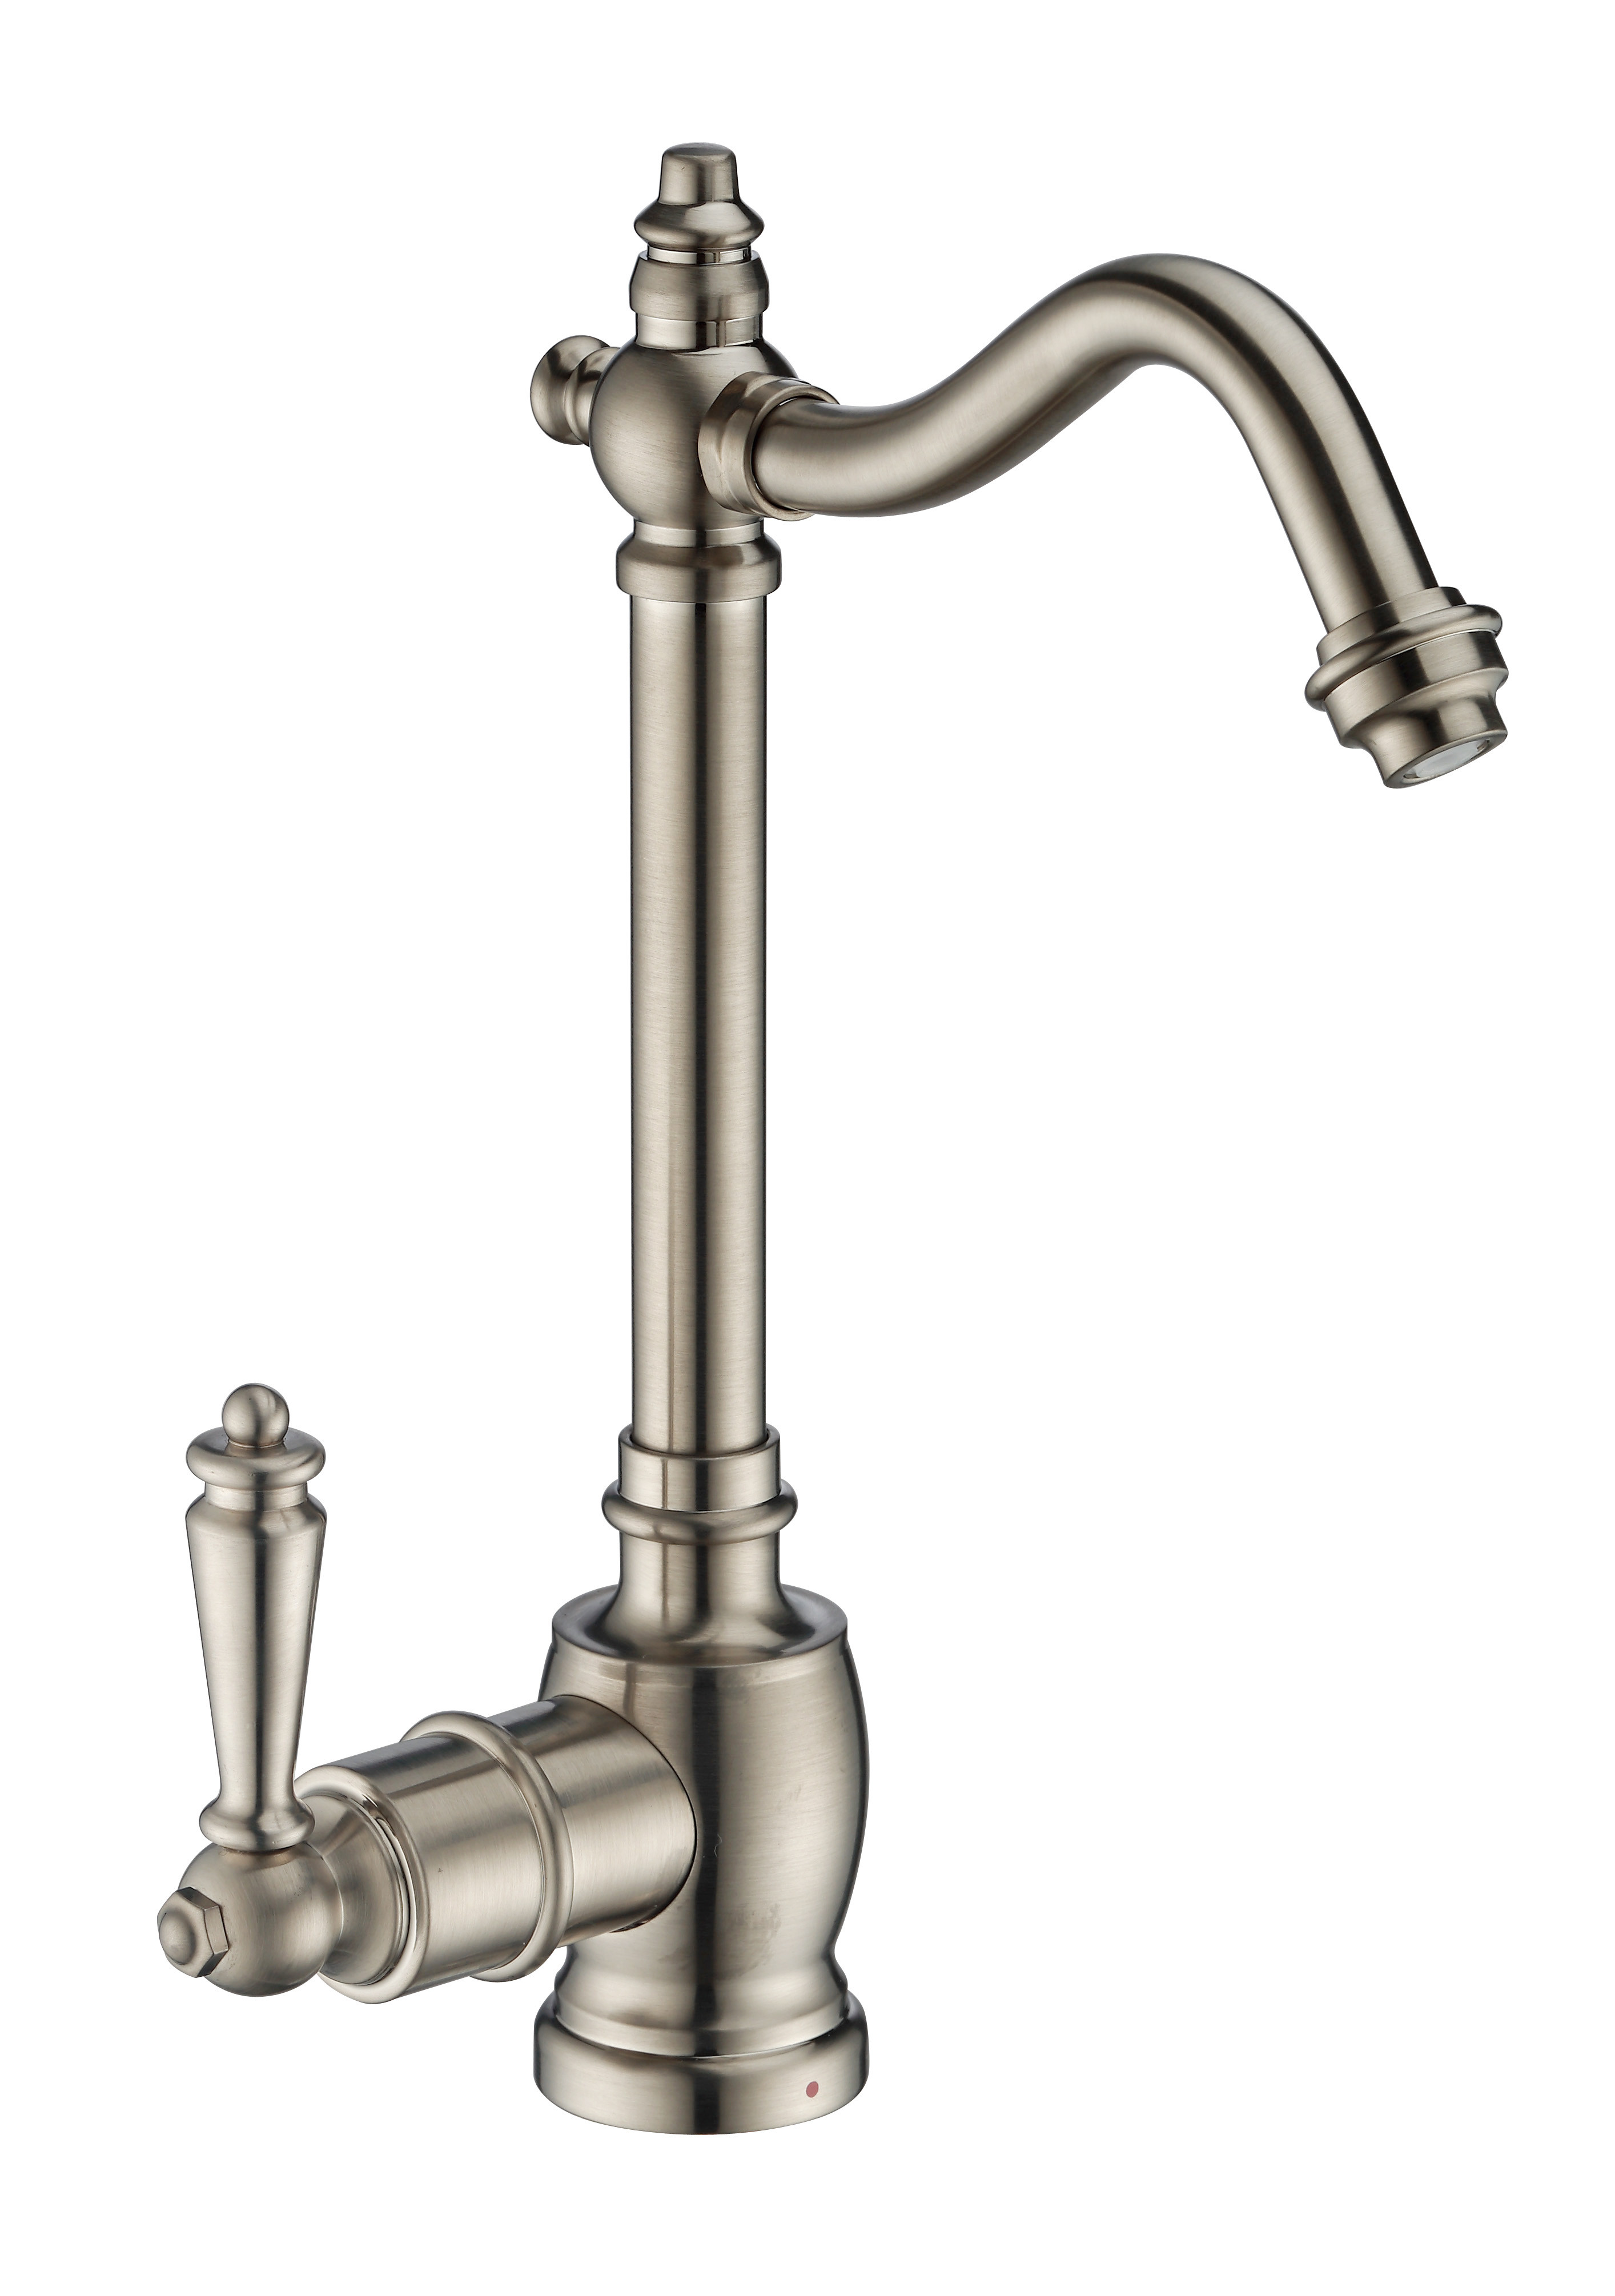 Whitehaus WHFH-H1006-BN Brushed Nickel Point of Use Instant Hot Water Faucet with Traditional Spout